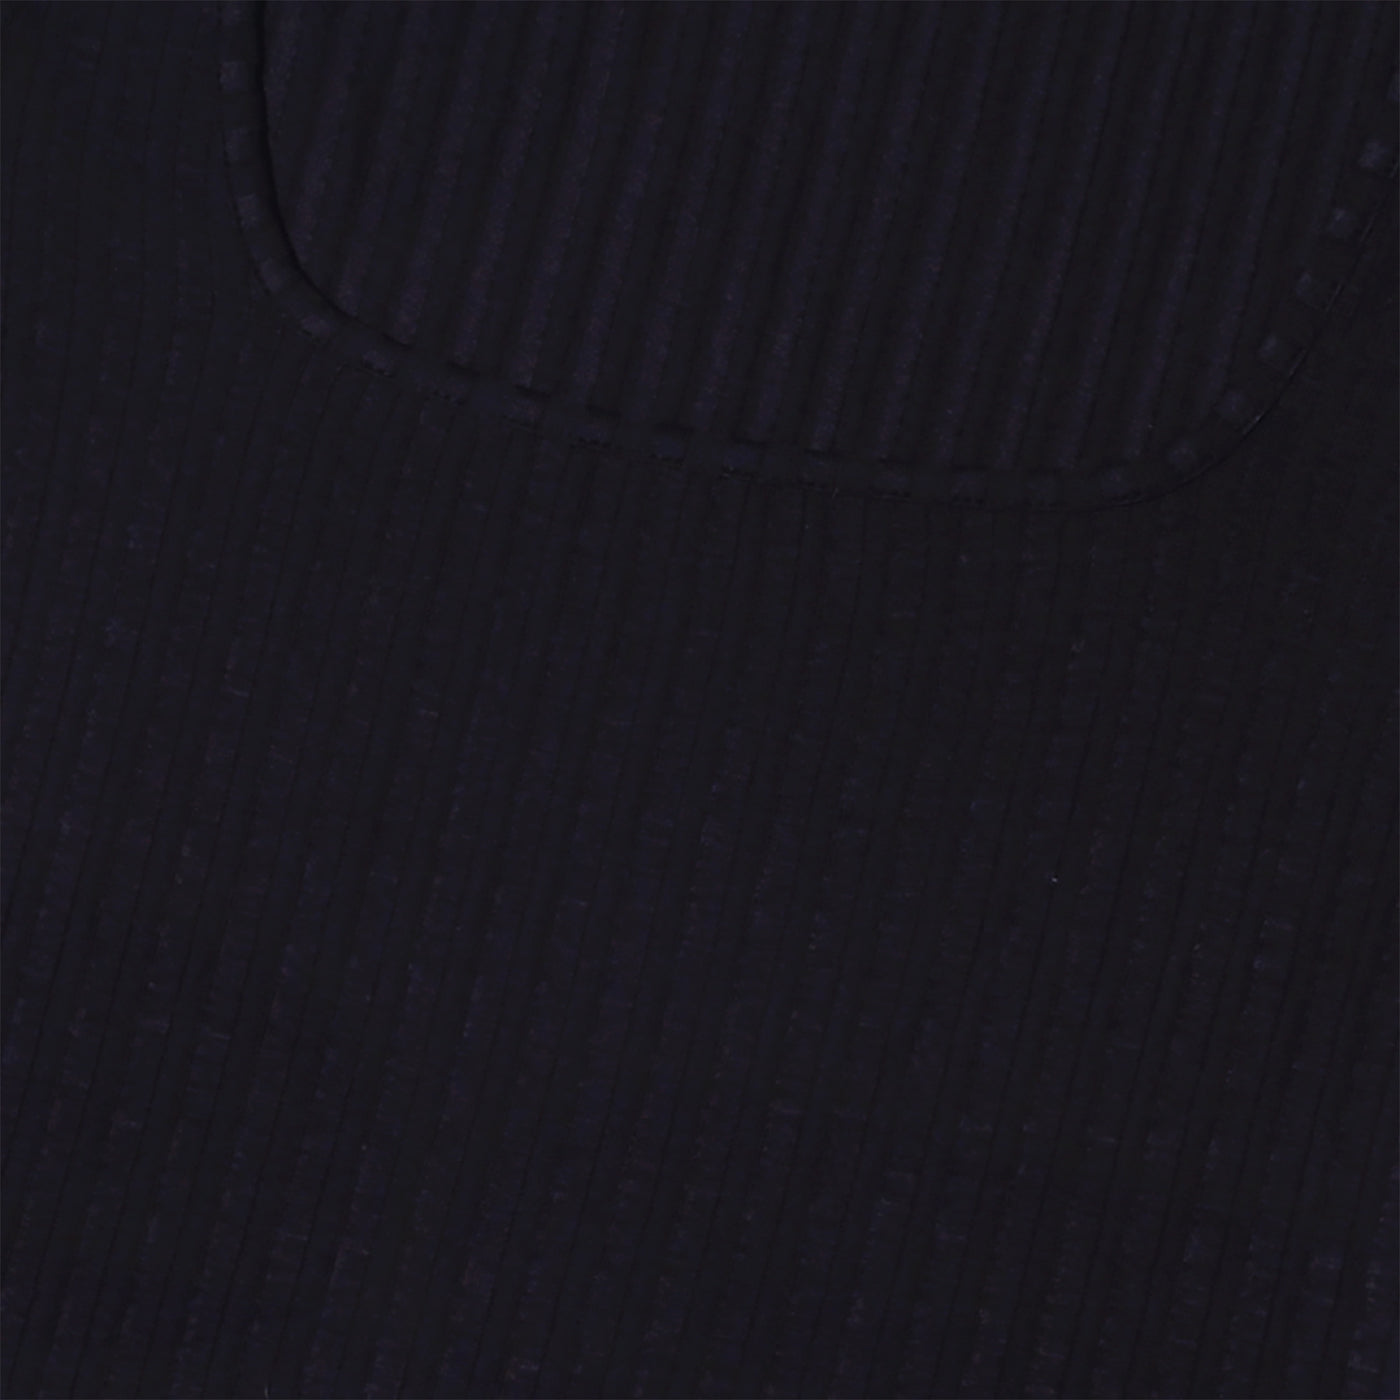 A detailed picture of the Celine Long Sleeve Bodystocking Black. 